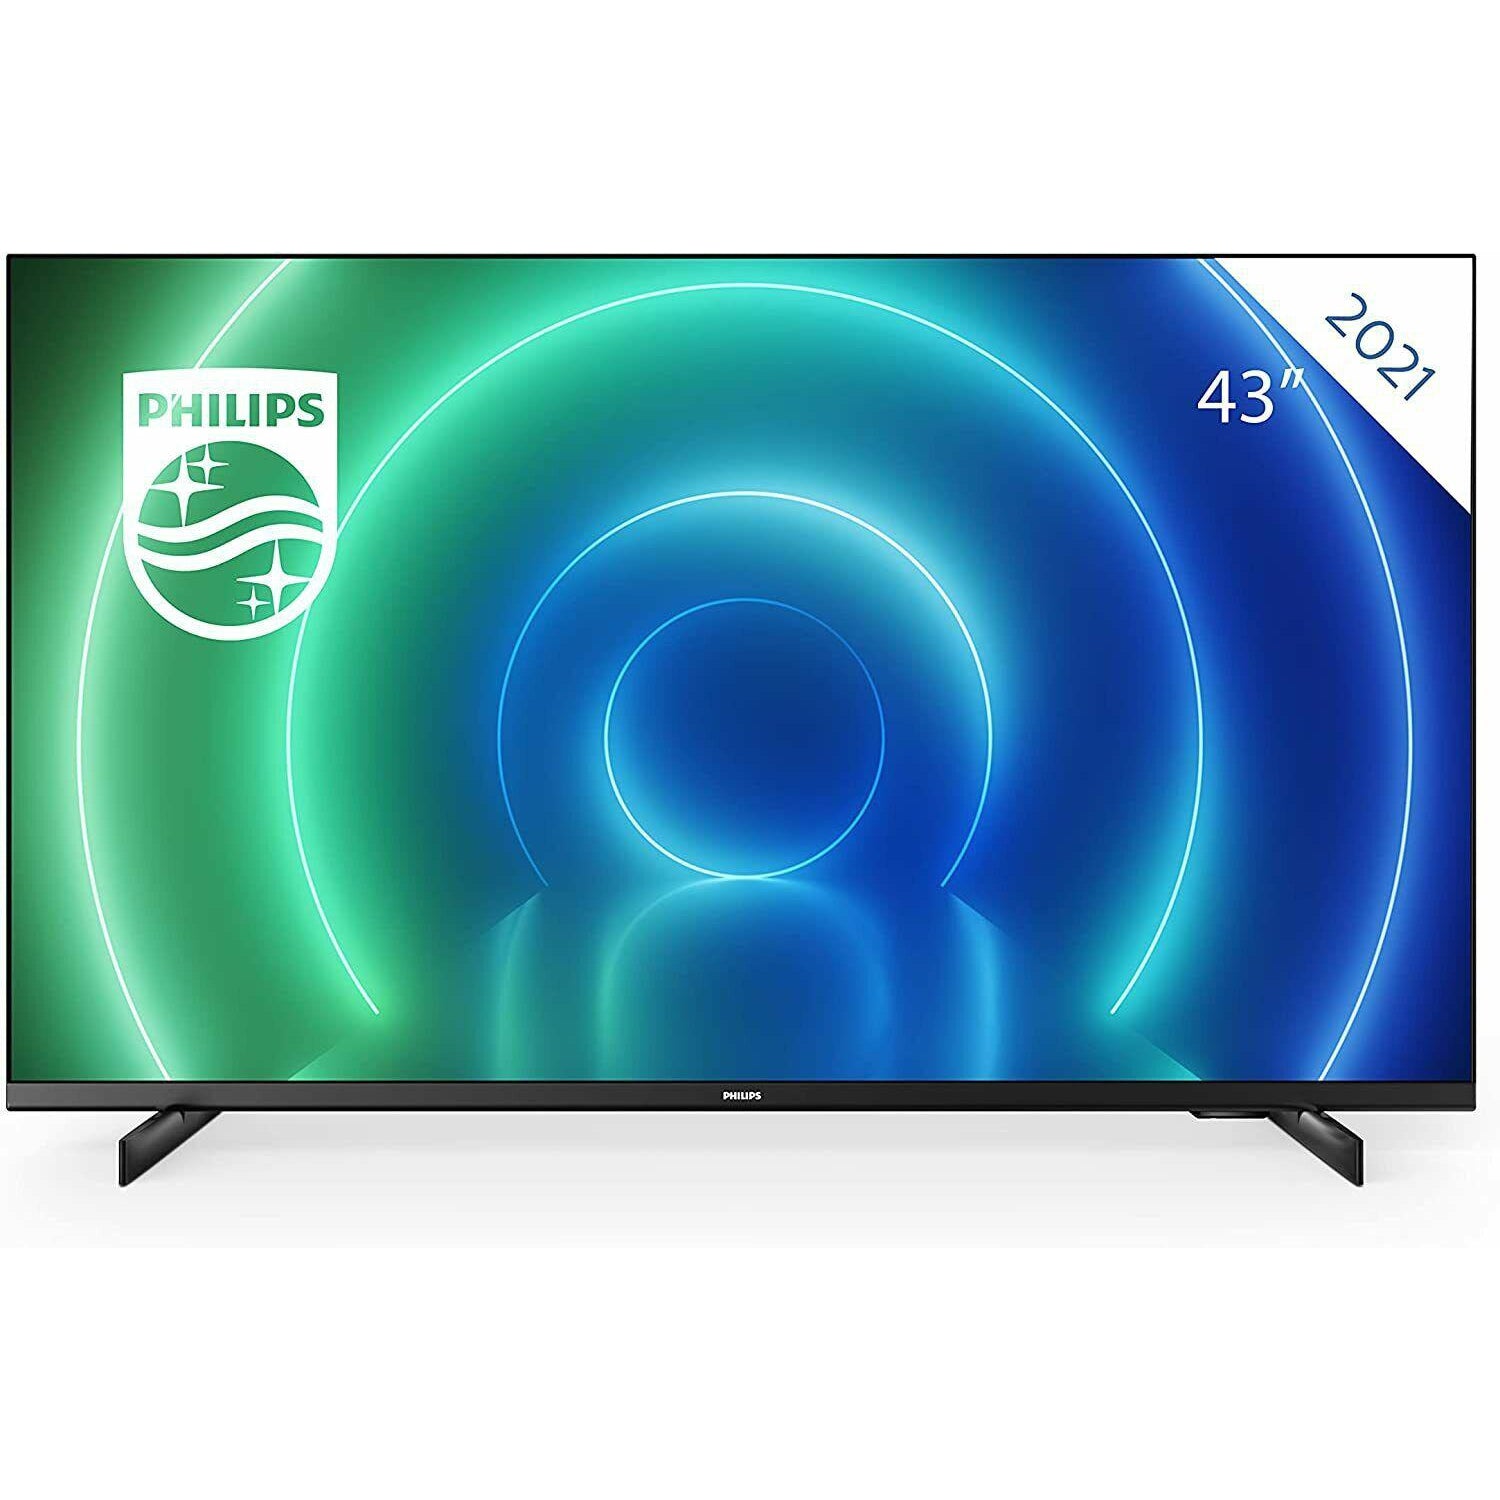 Philips 43 Inch 43PUS7506 Smart 4K UHD HDR LED Freeview TV